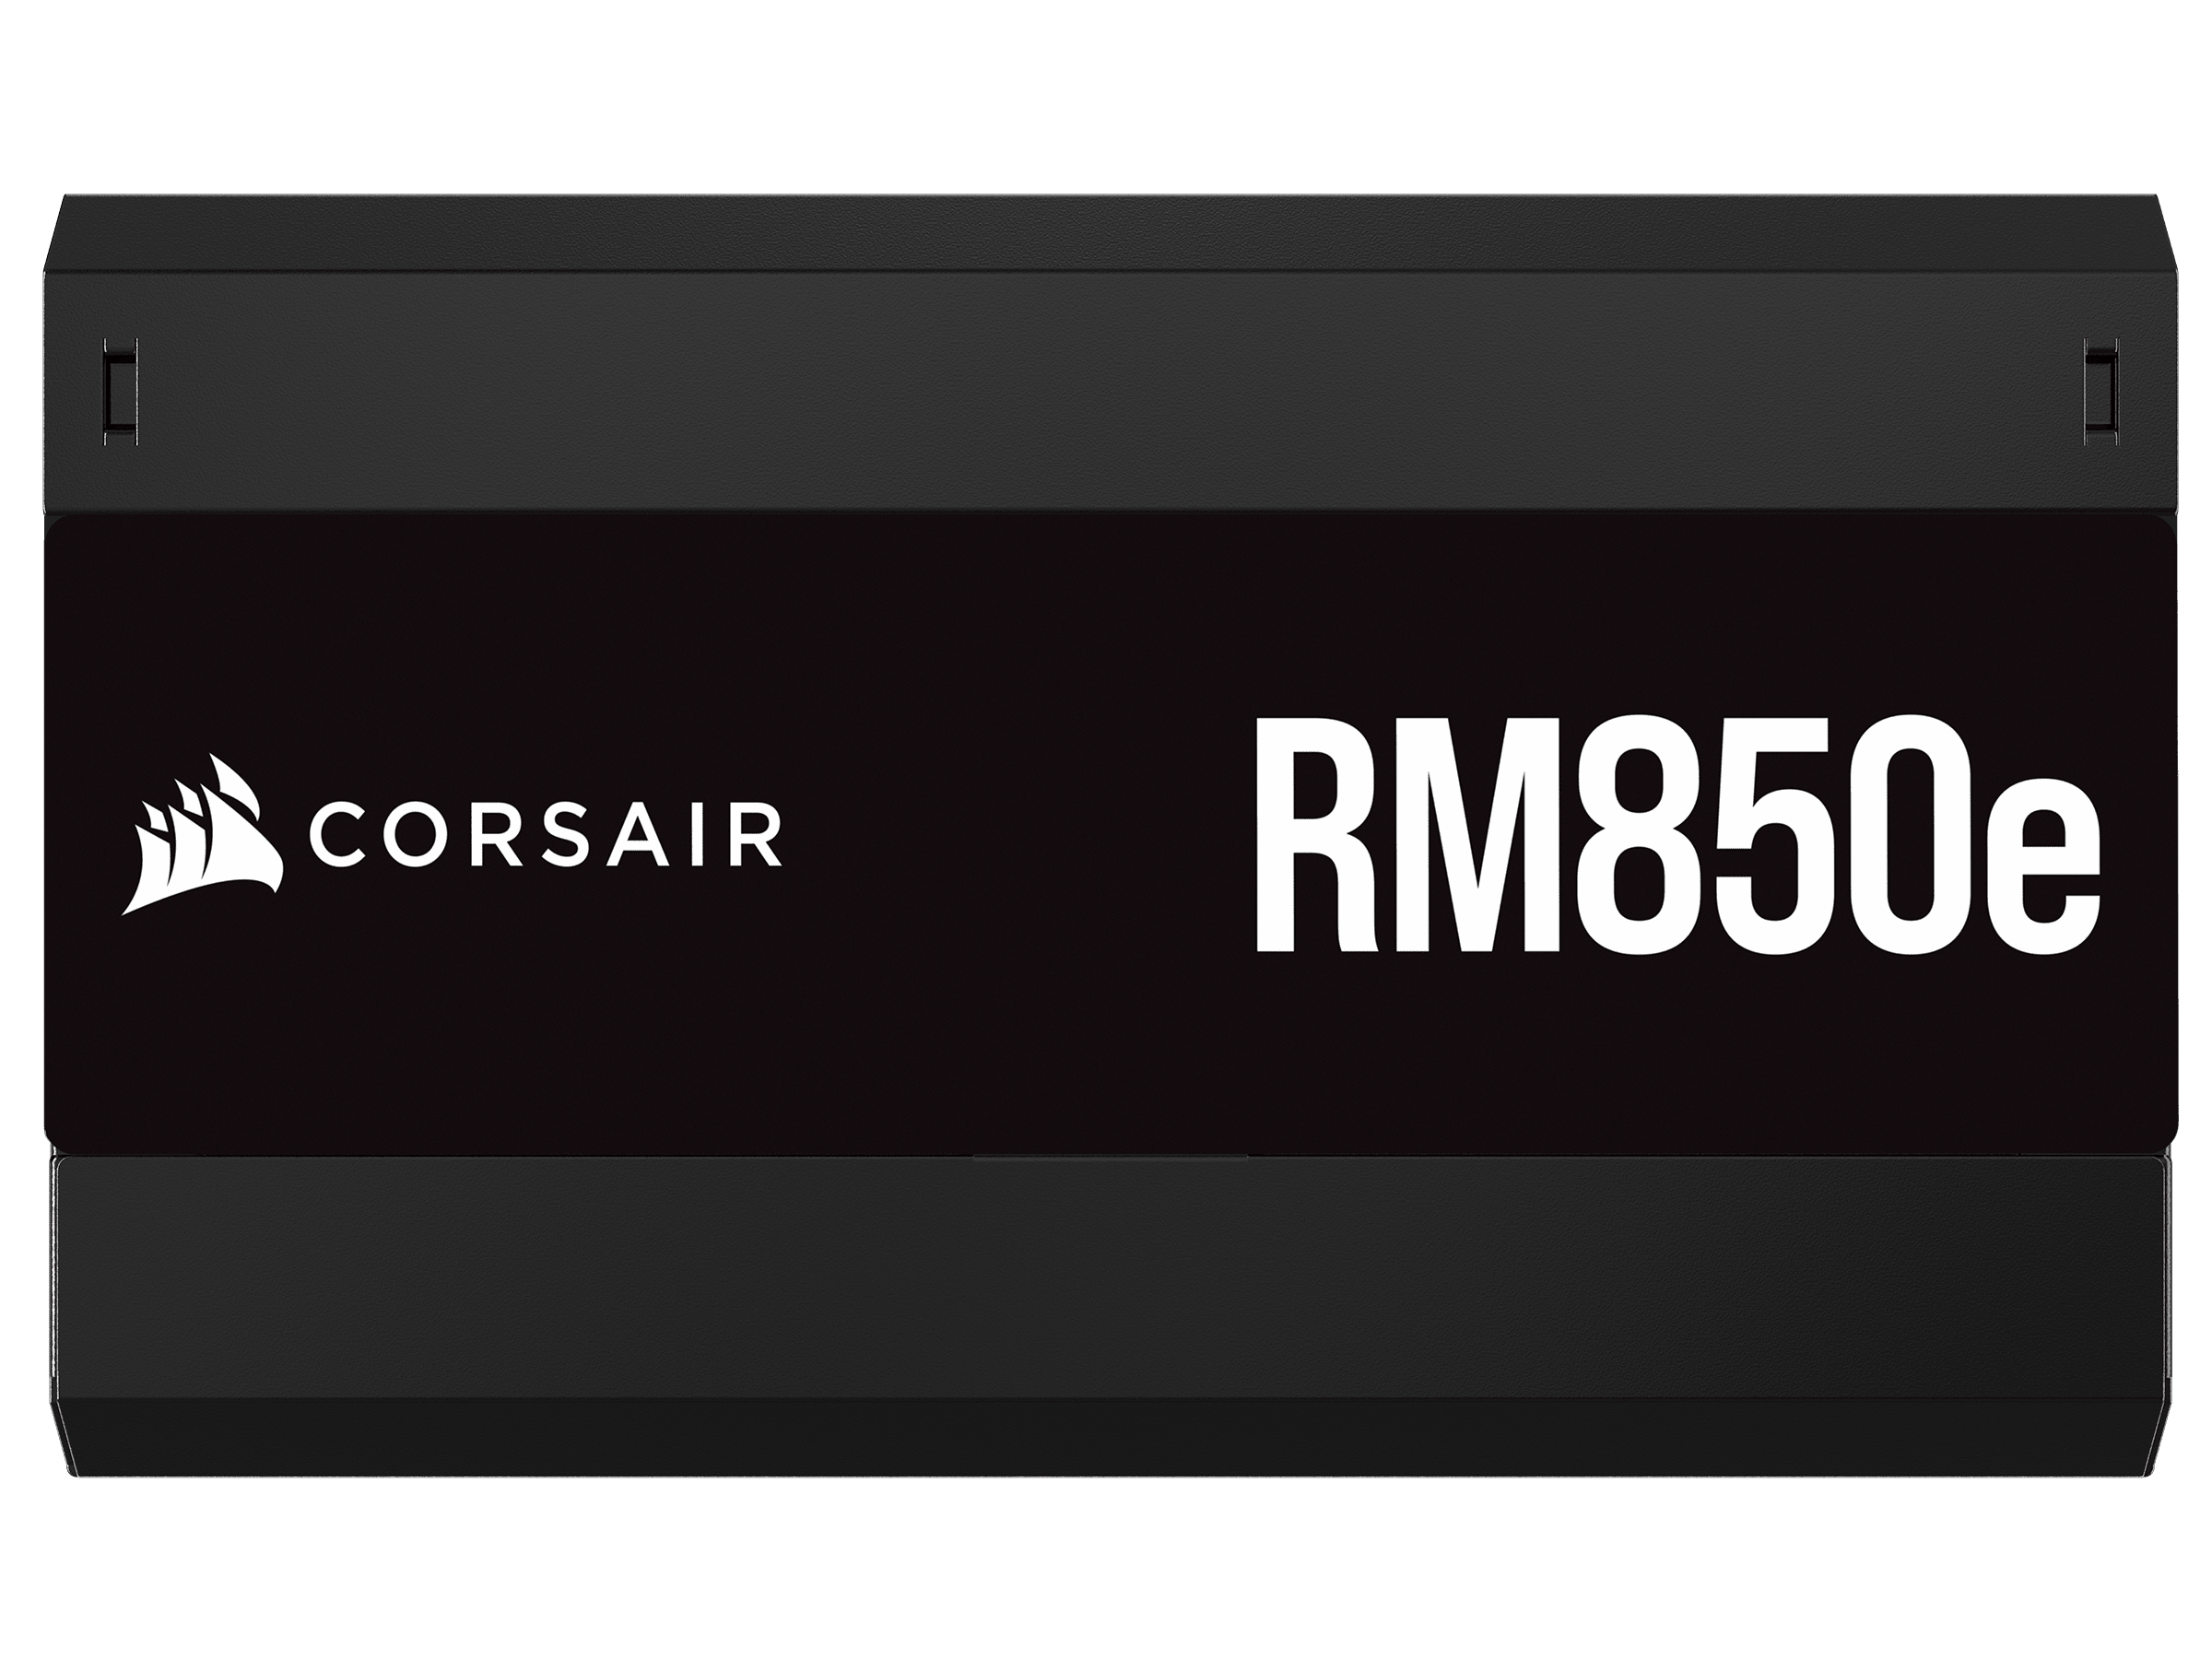 RMe Series RM850e Fully Modular Low-Noise ATX Power Supply